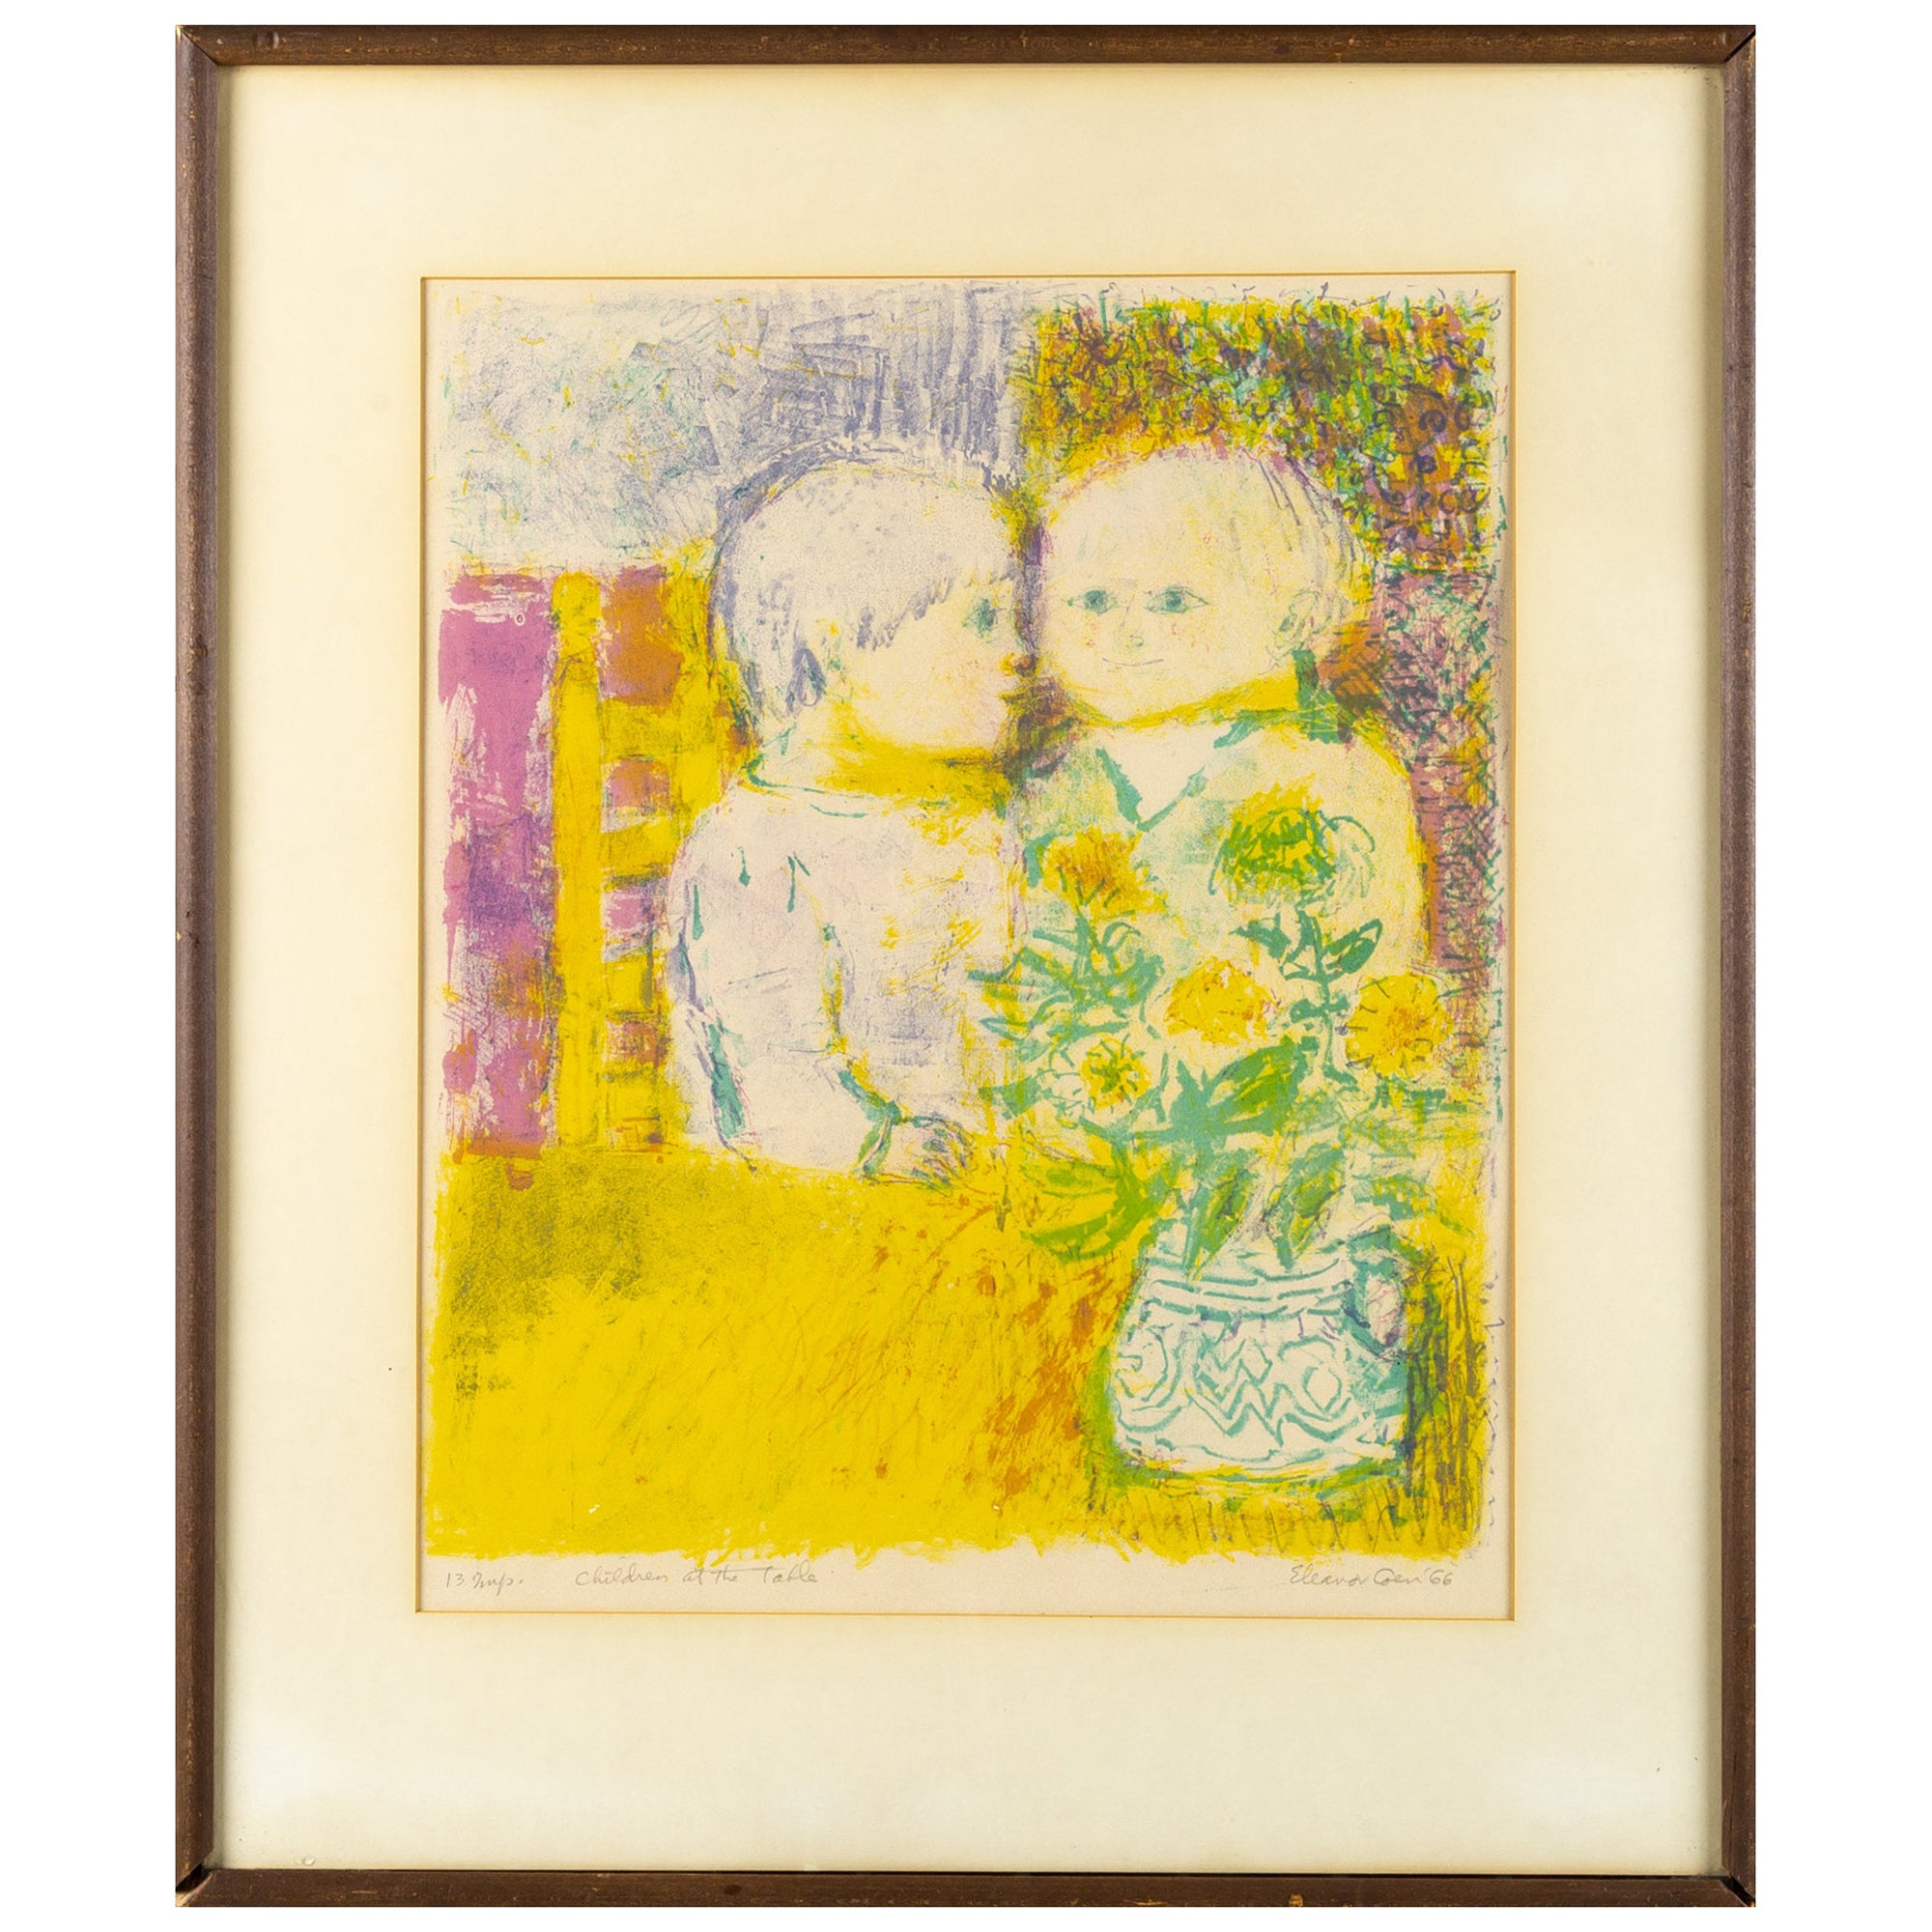 Eleanor Coen 'Children At The Table' Signed 1966 Wall Art